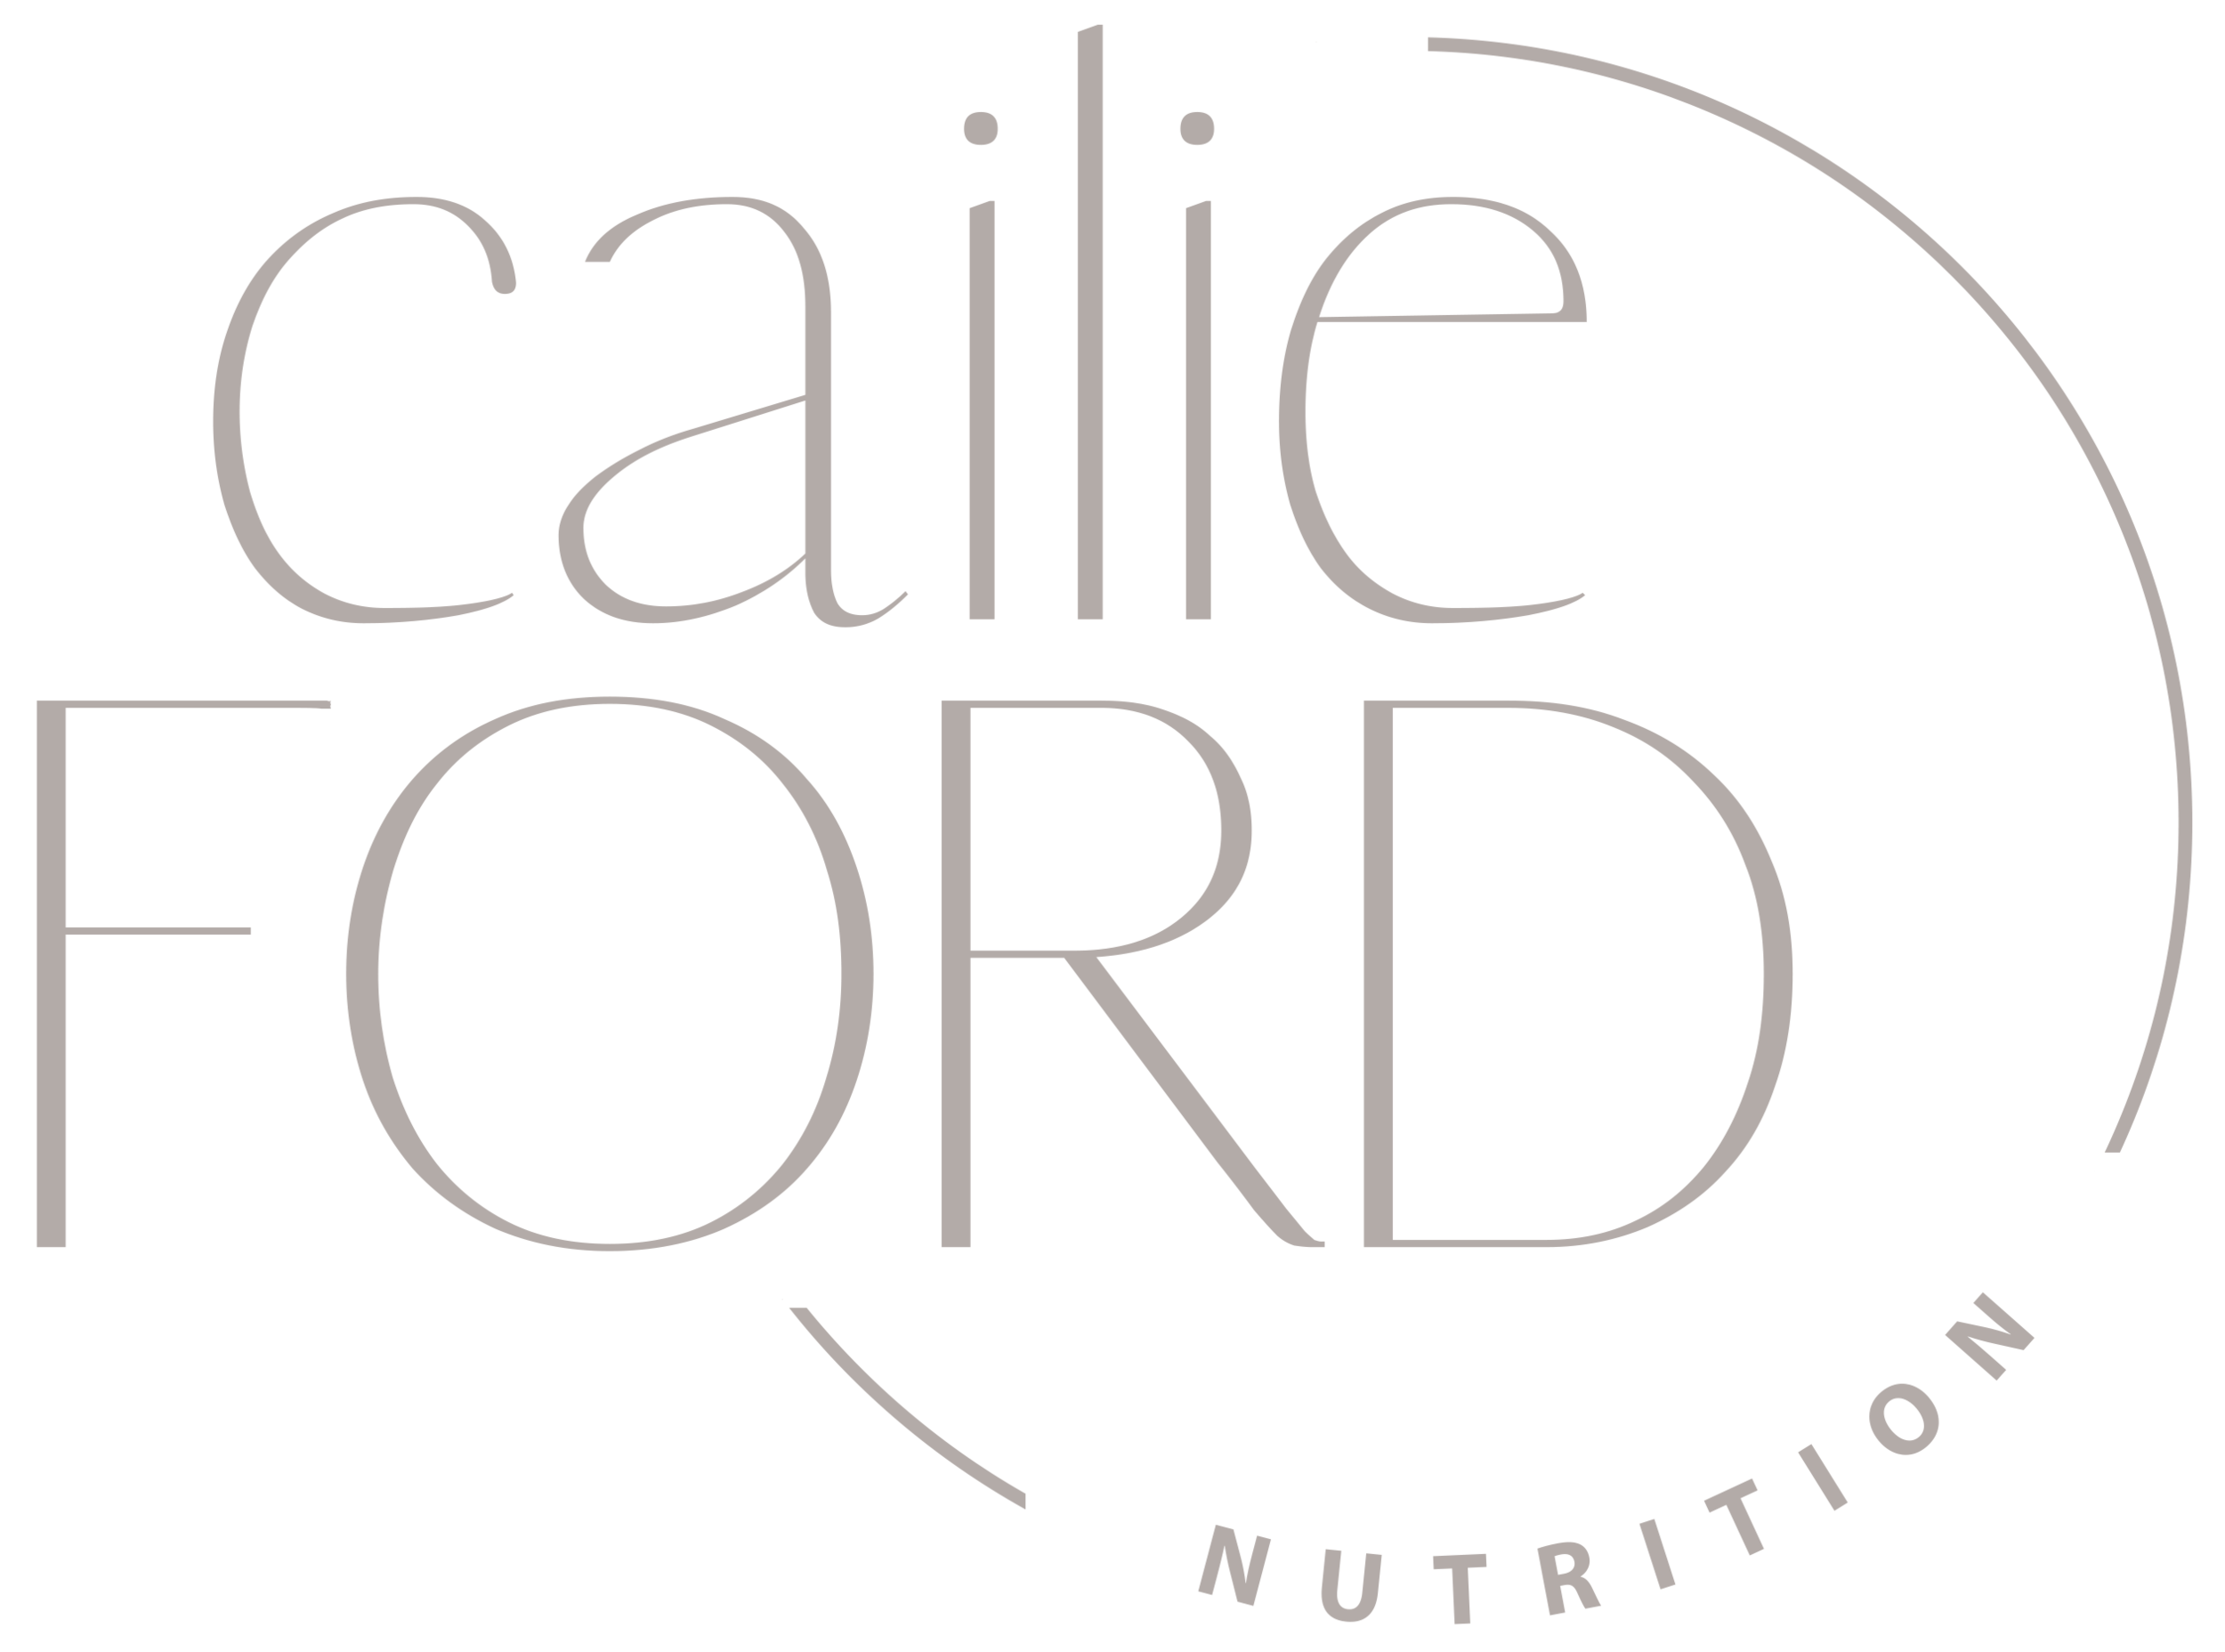 Cailie Ford Nutrition